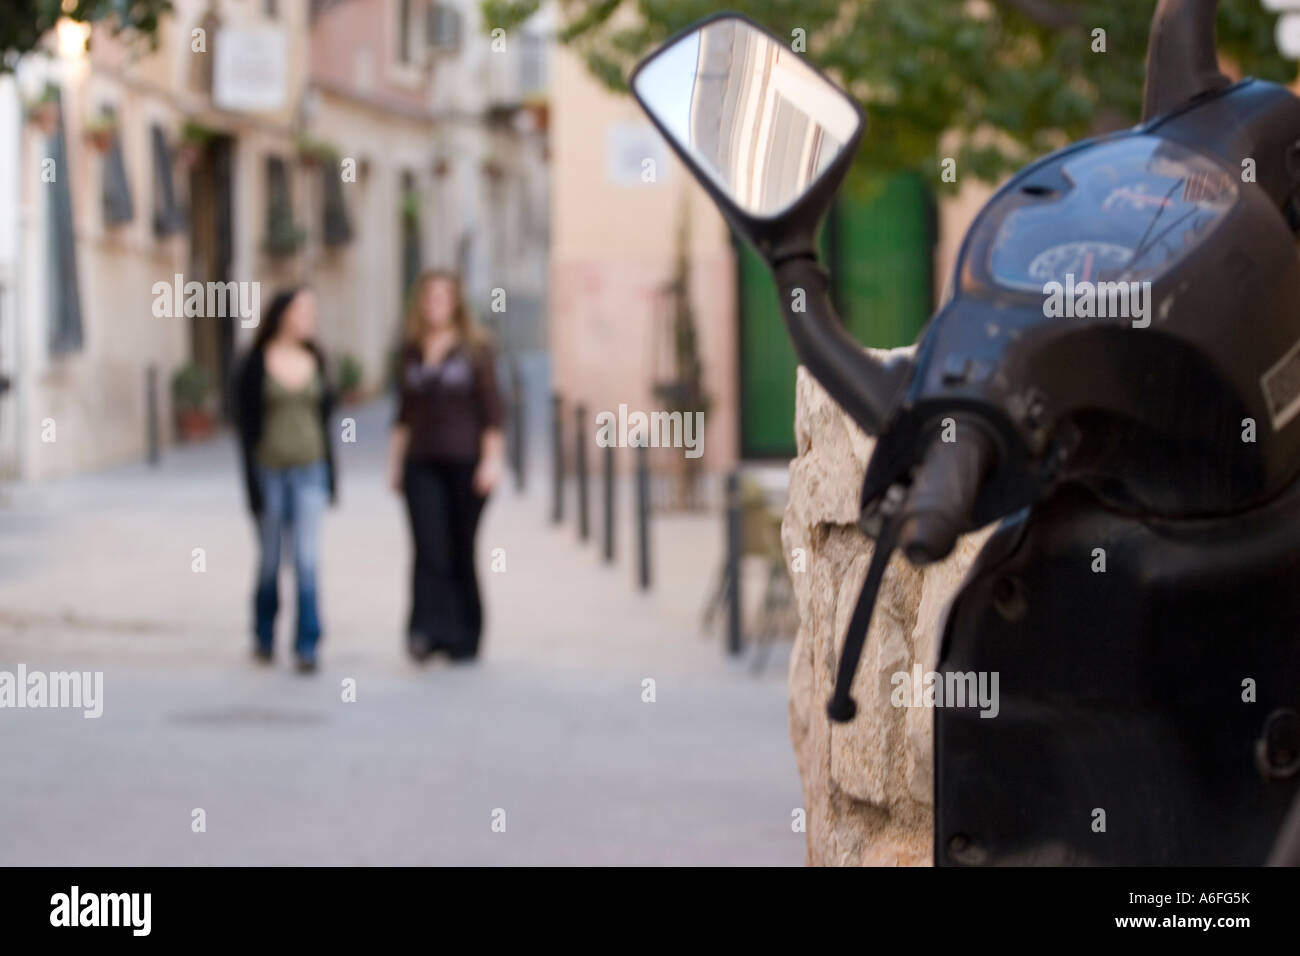 Two young women walking along Spanish street with mo-ped in foreground. Stock Photo